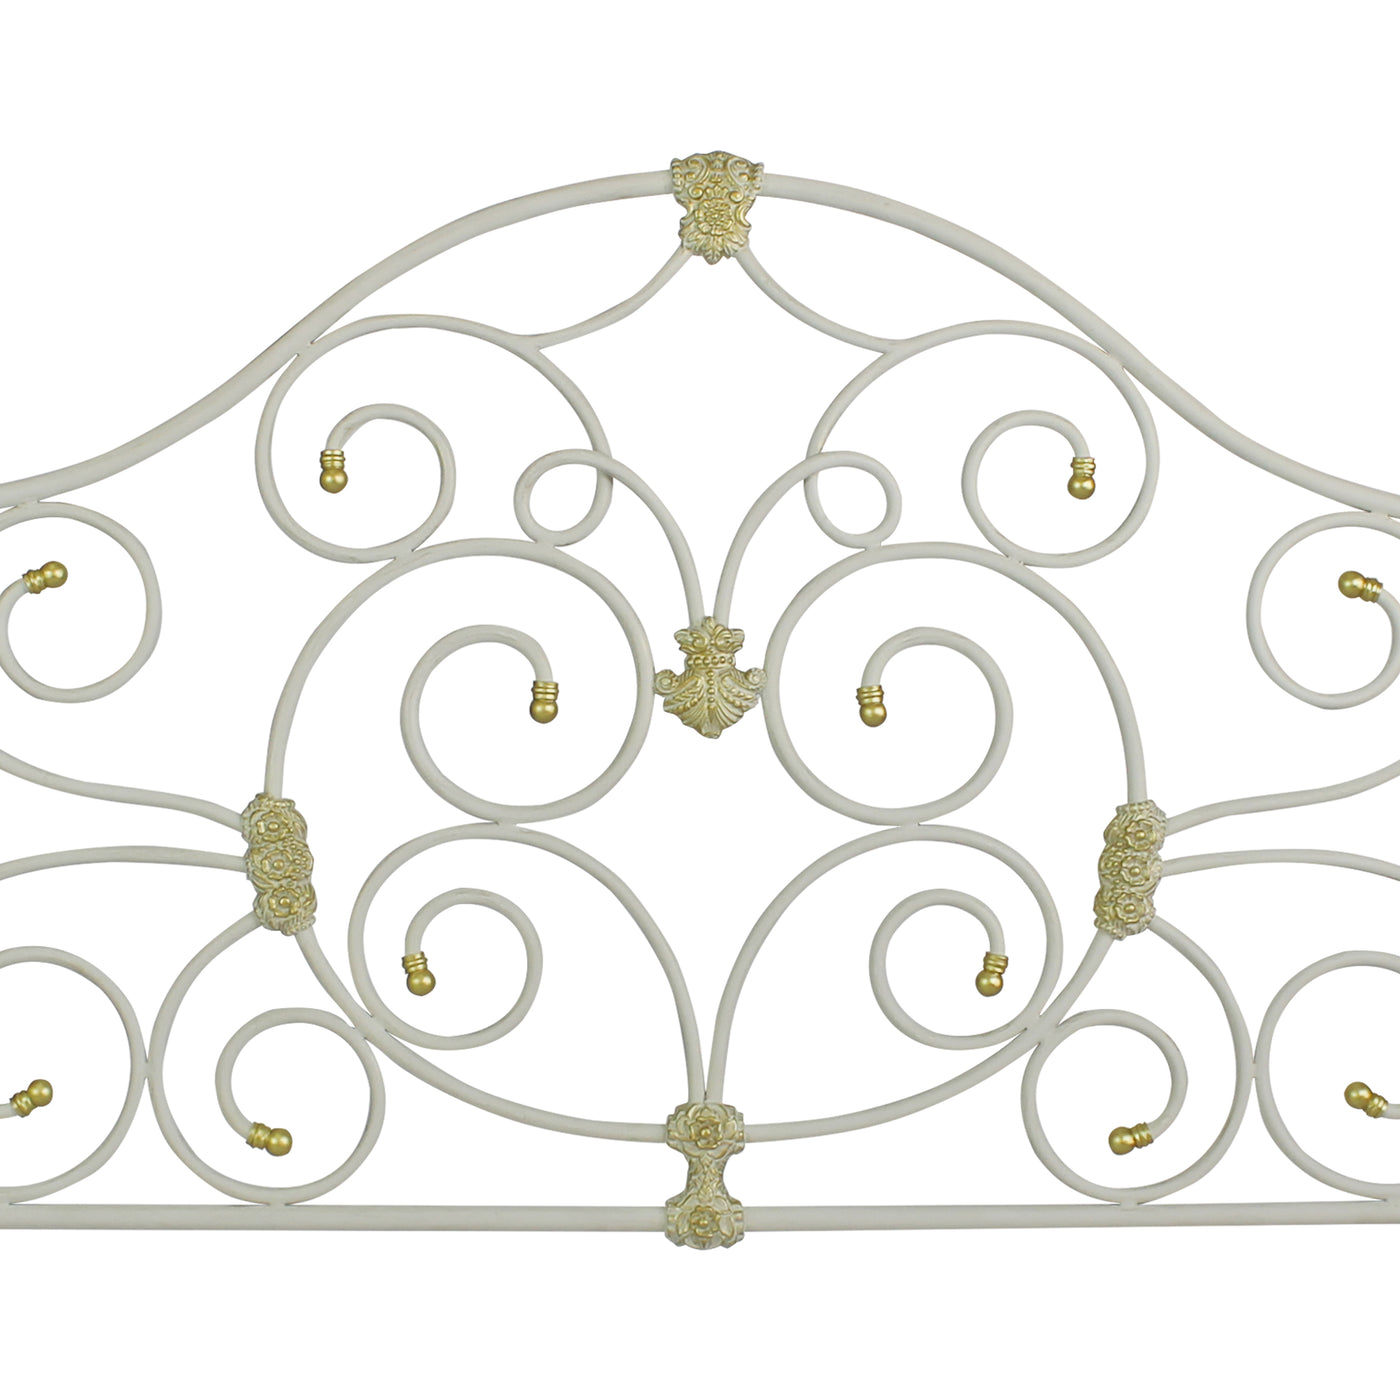 Close up of a metal headboard for a single bed with scrolls and classical motifs, painted in white and gold